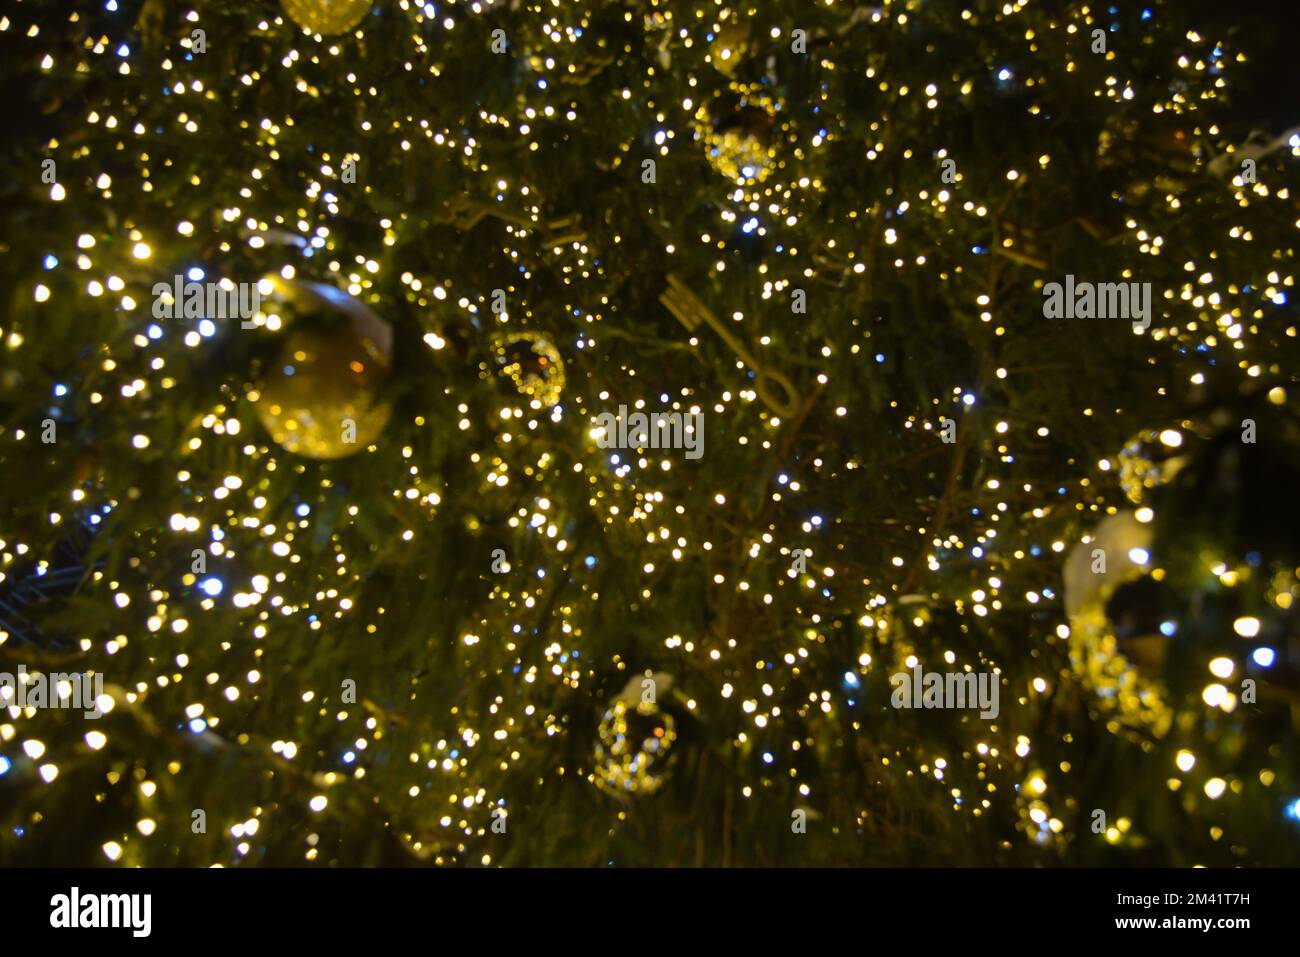 defocused Christmas tree with Christmas lights and decorations. Stock Photo